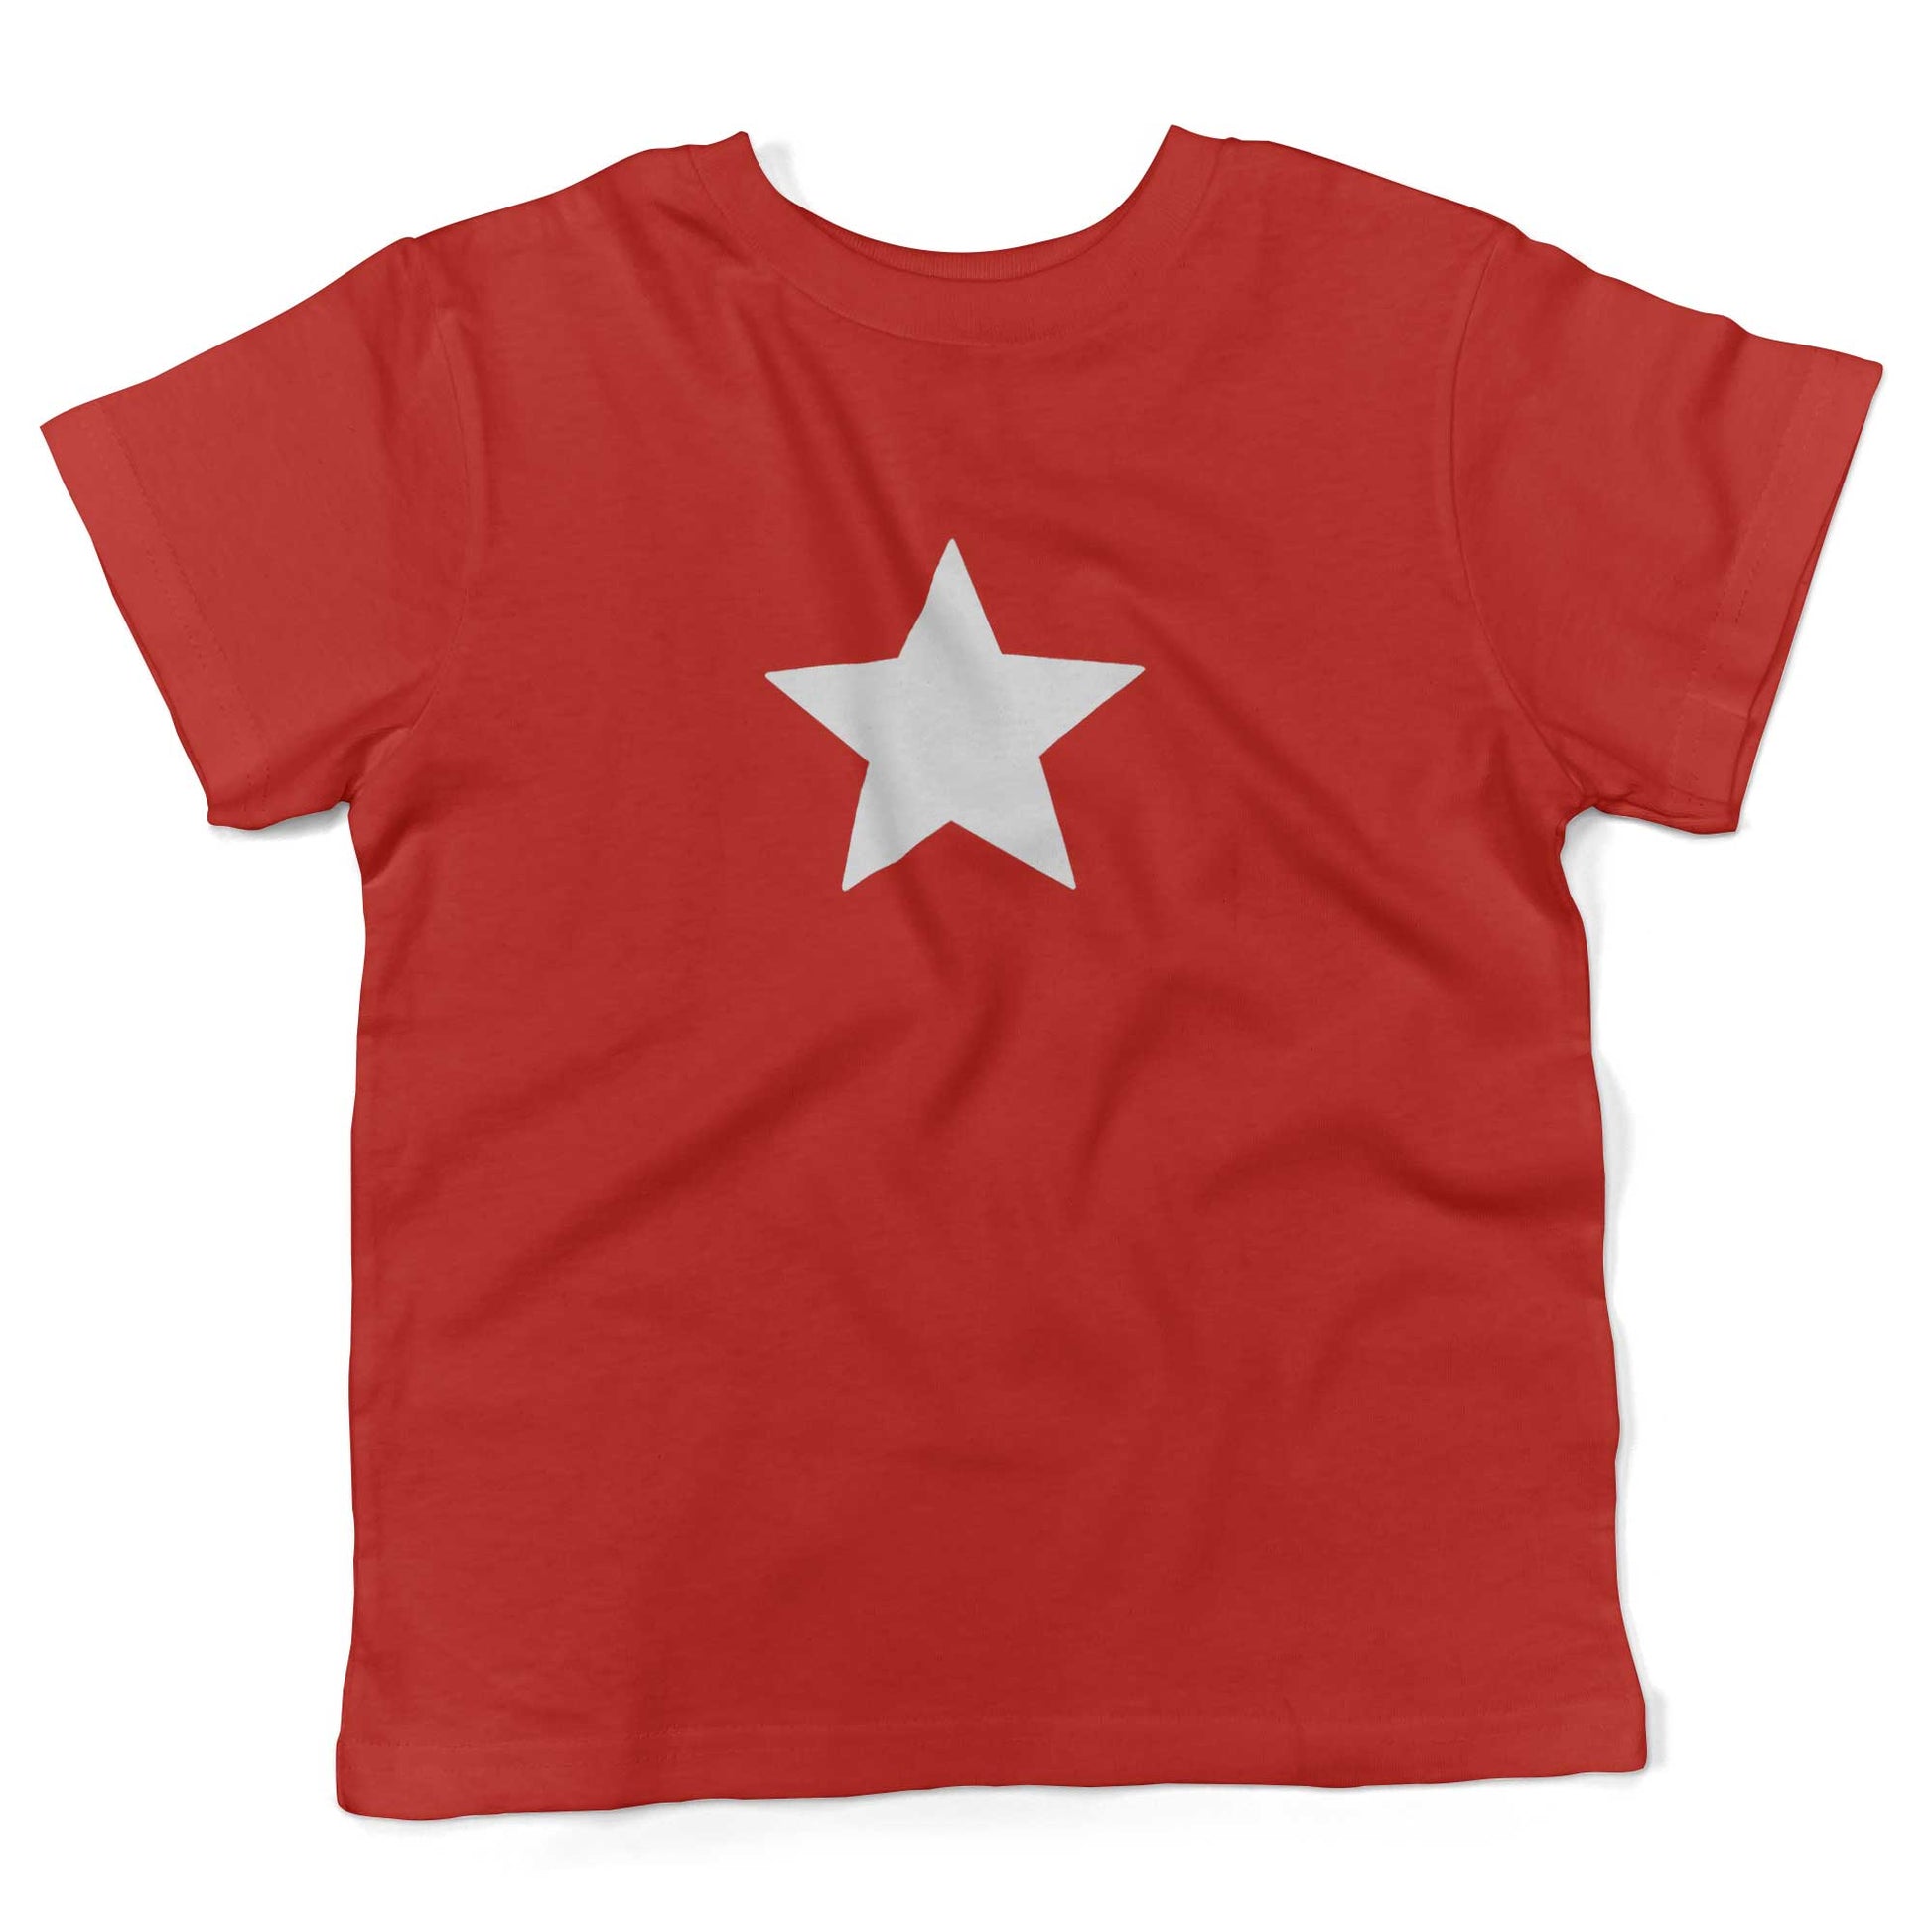 Five-Point Star Toddler Shirt-Red-White Star